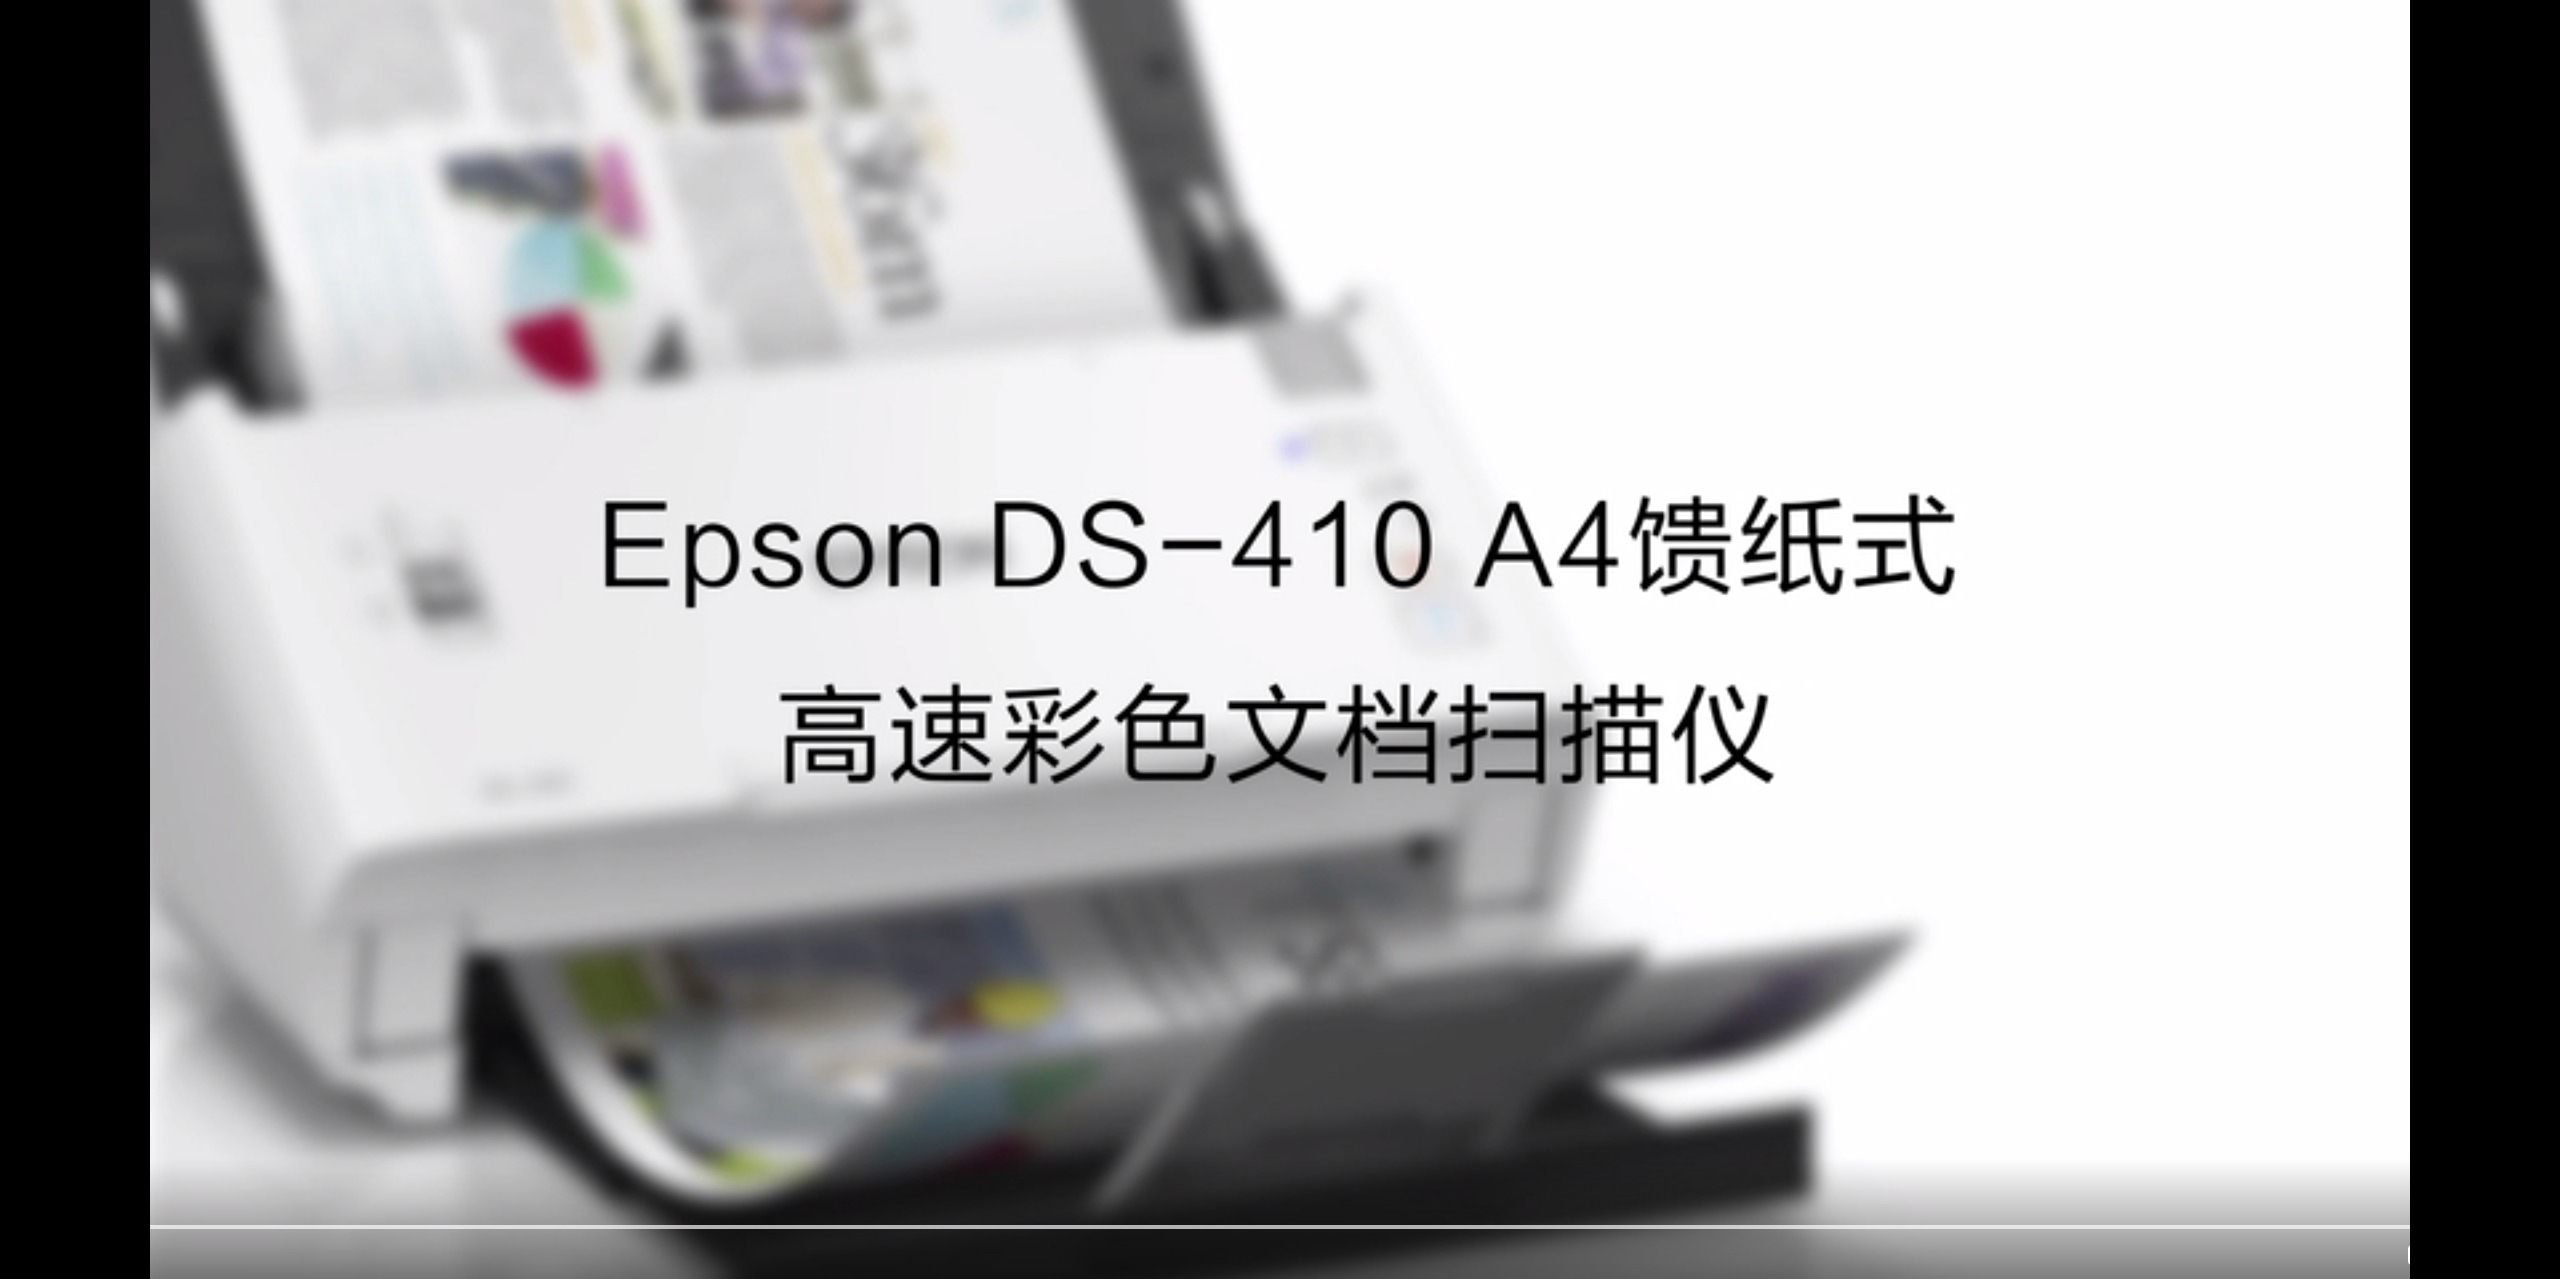 EPSON_PRODUCTS_Epson DS-410